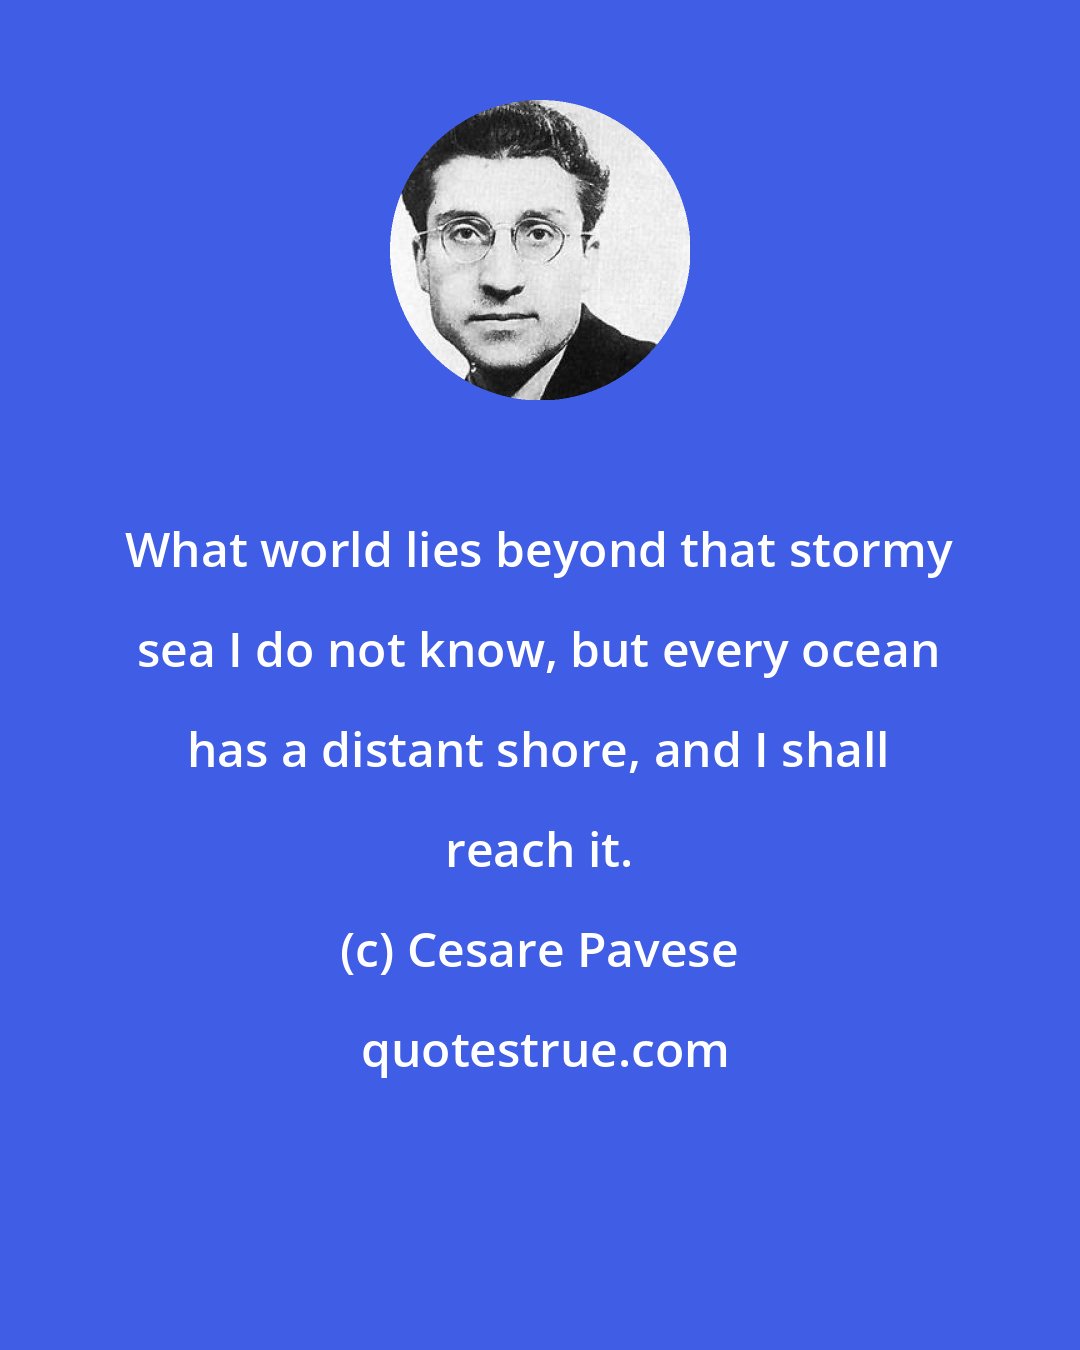 Cesare Pavese: What world lies beyond that stormy sea I do not know, but every ocean has a distant shore, and I shall reach it.